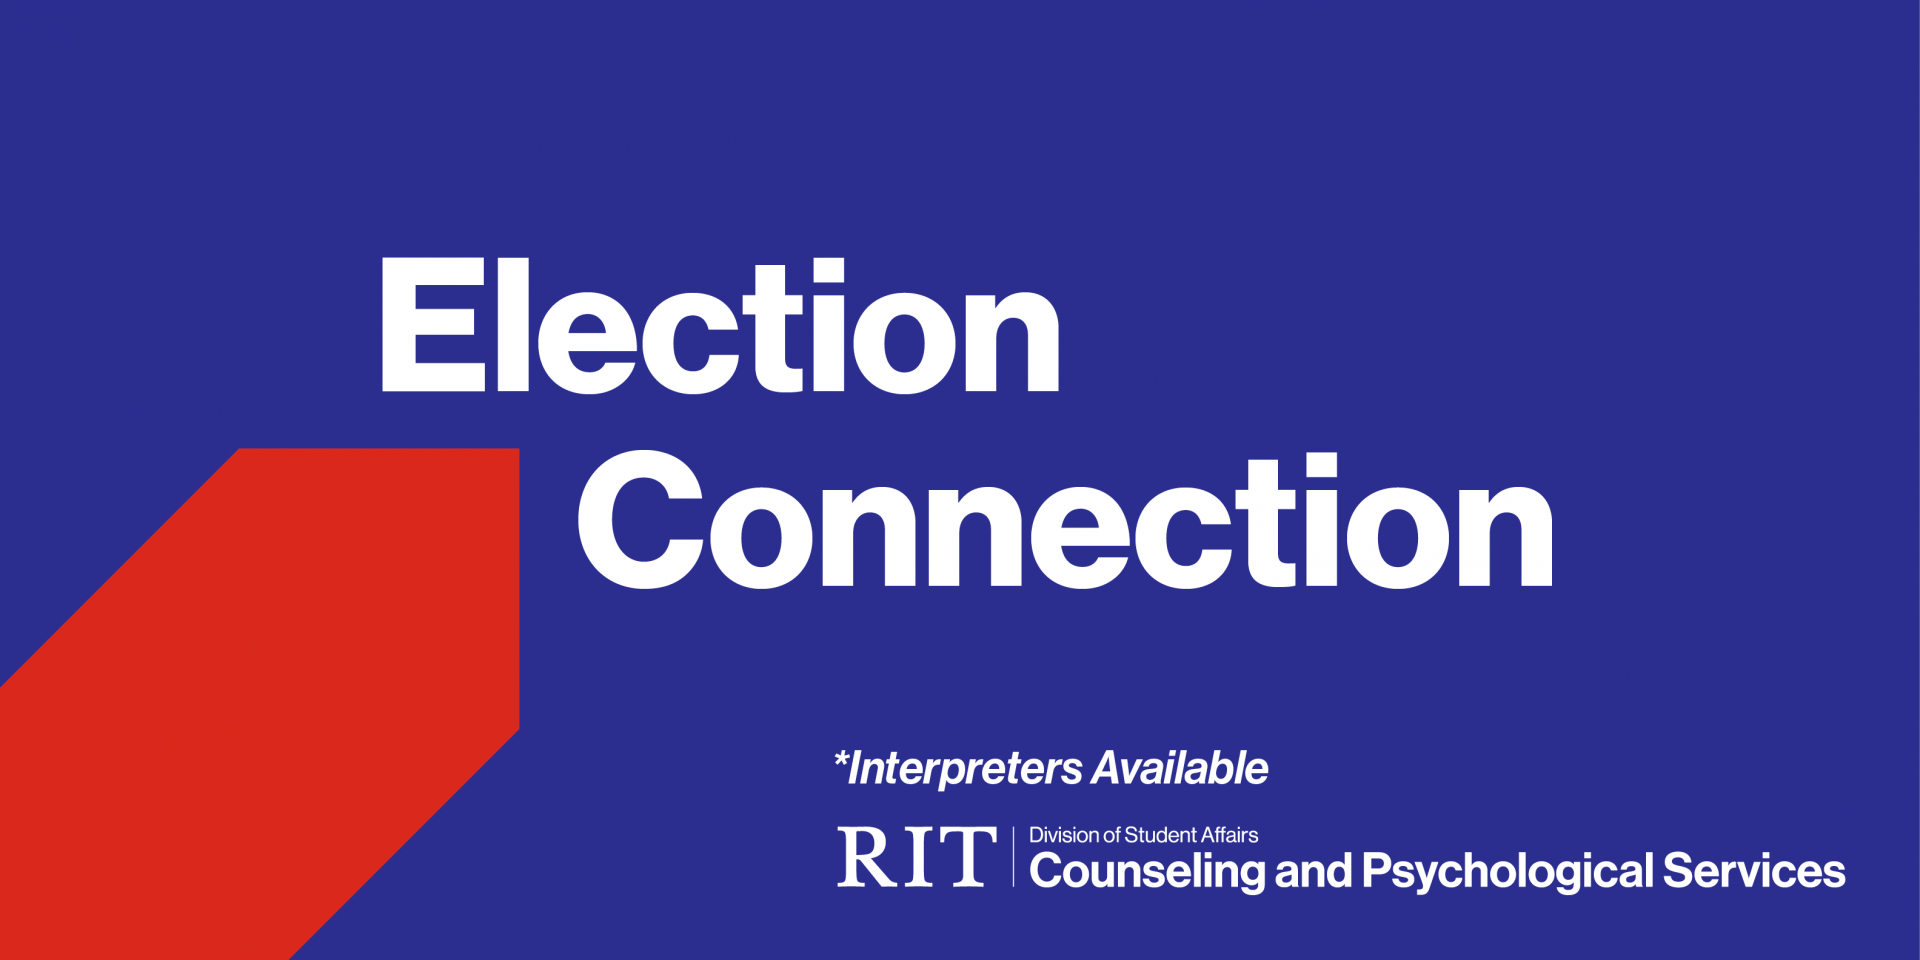 Election Connection with Counseling and Psychological Services - Interpreters available